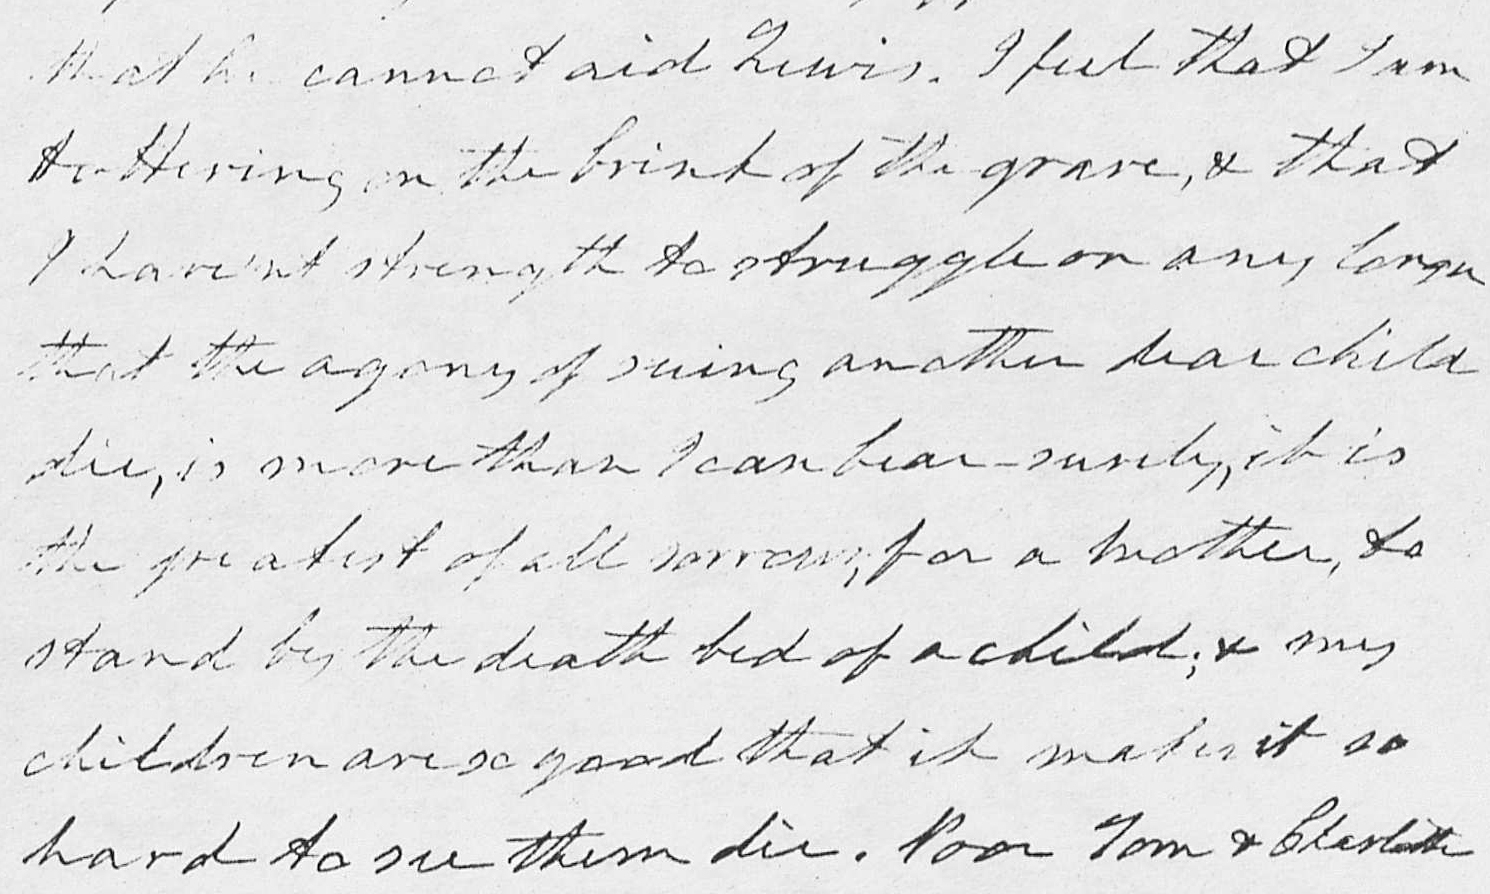 Detail of copy of letter from Jane Hollins Nicholas Randolph to her cousin Mary, November 15, 1870. (MSS 9828. Image by Petrina Jackson)